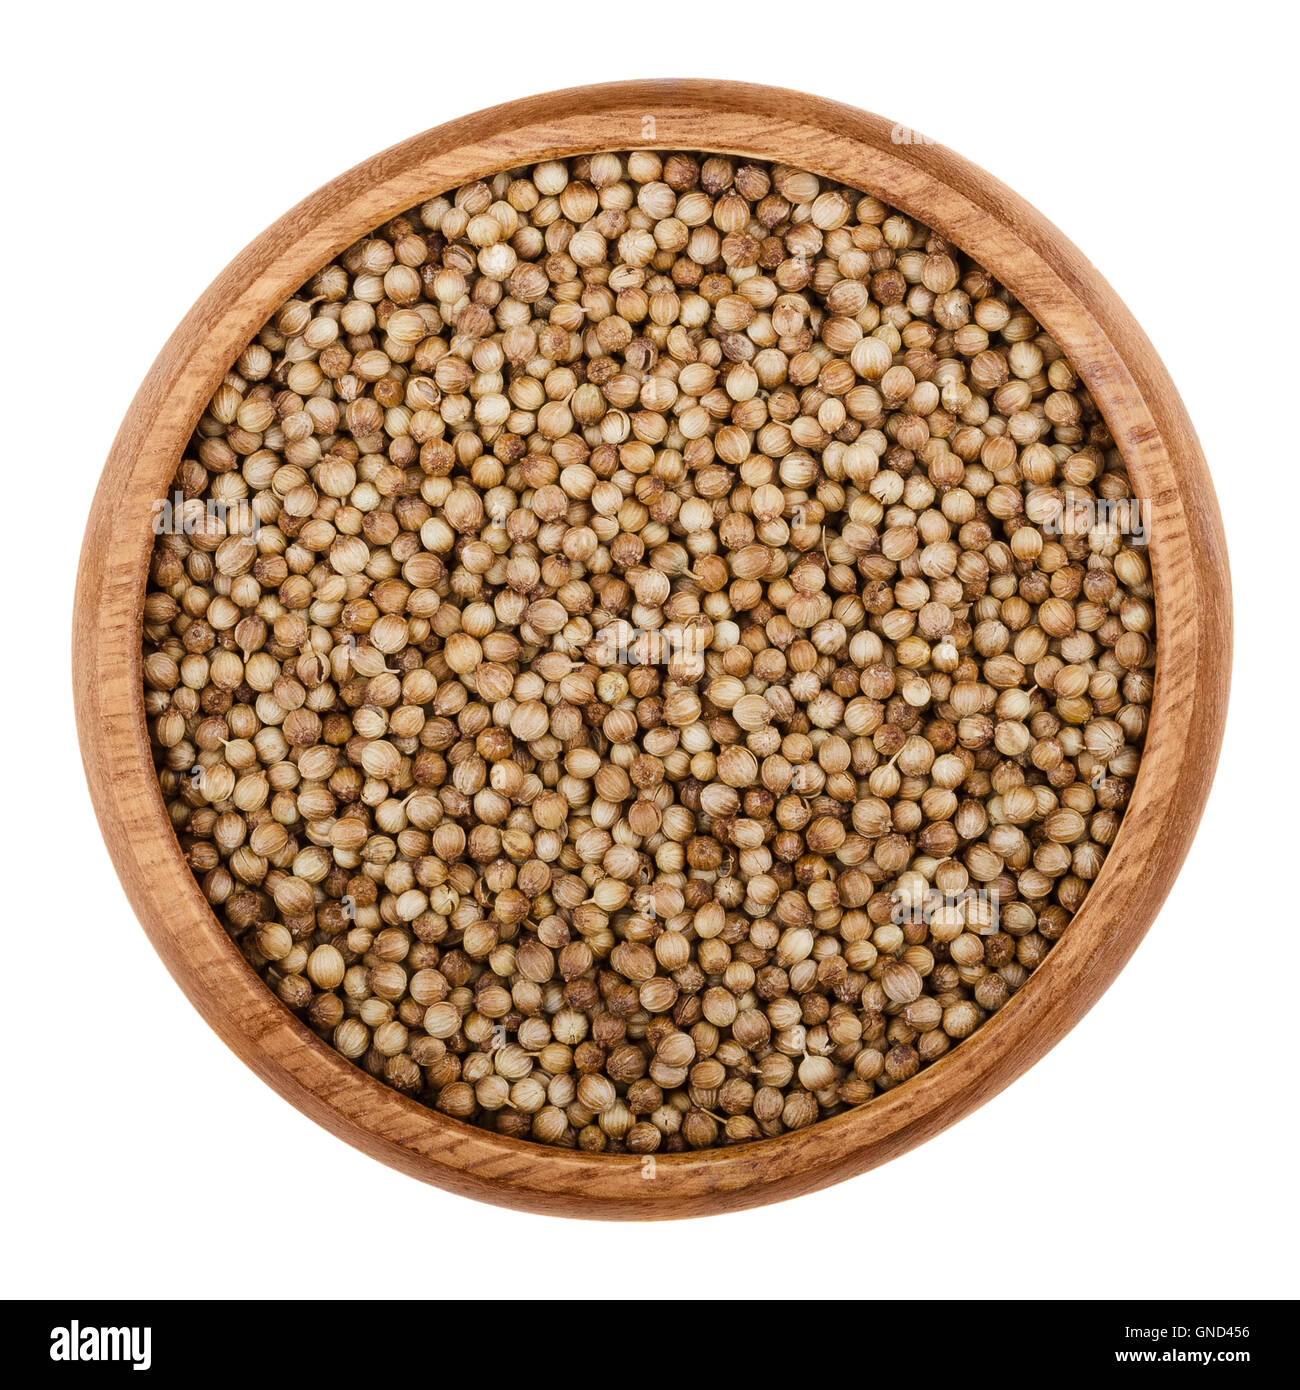 Dried coriander seeds in a wooden bowl on white background. Edible brown fruits of Coriandrum sativum, also cilantro. Stock Photo